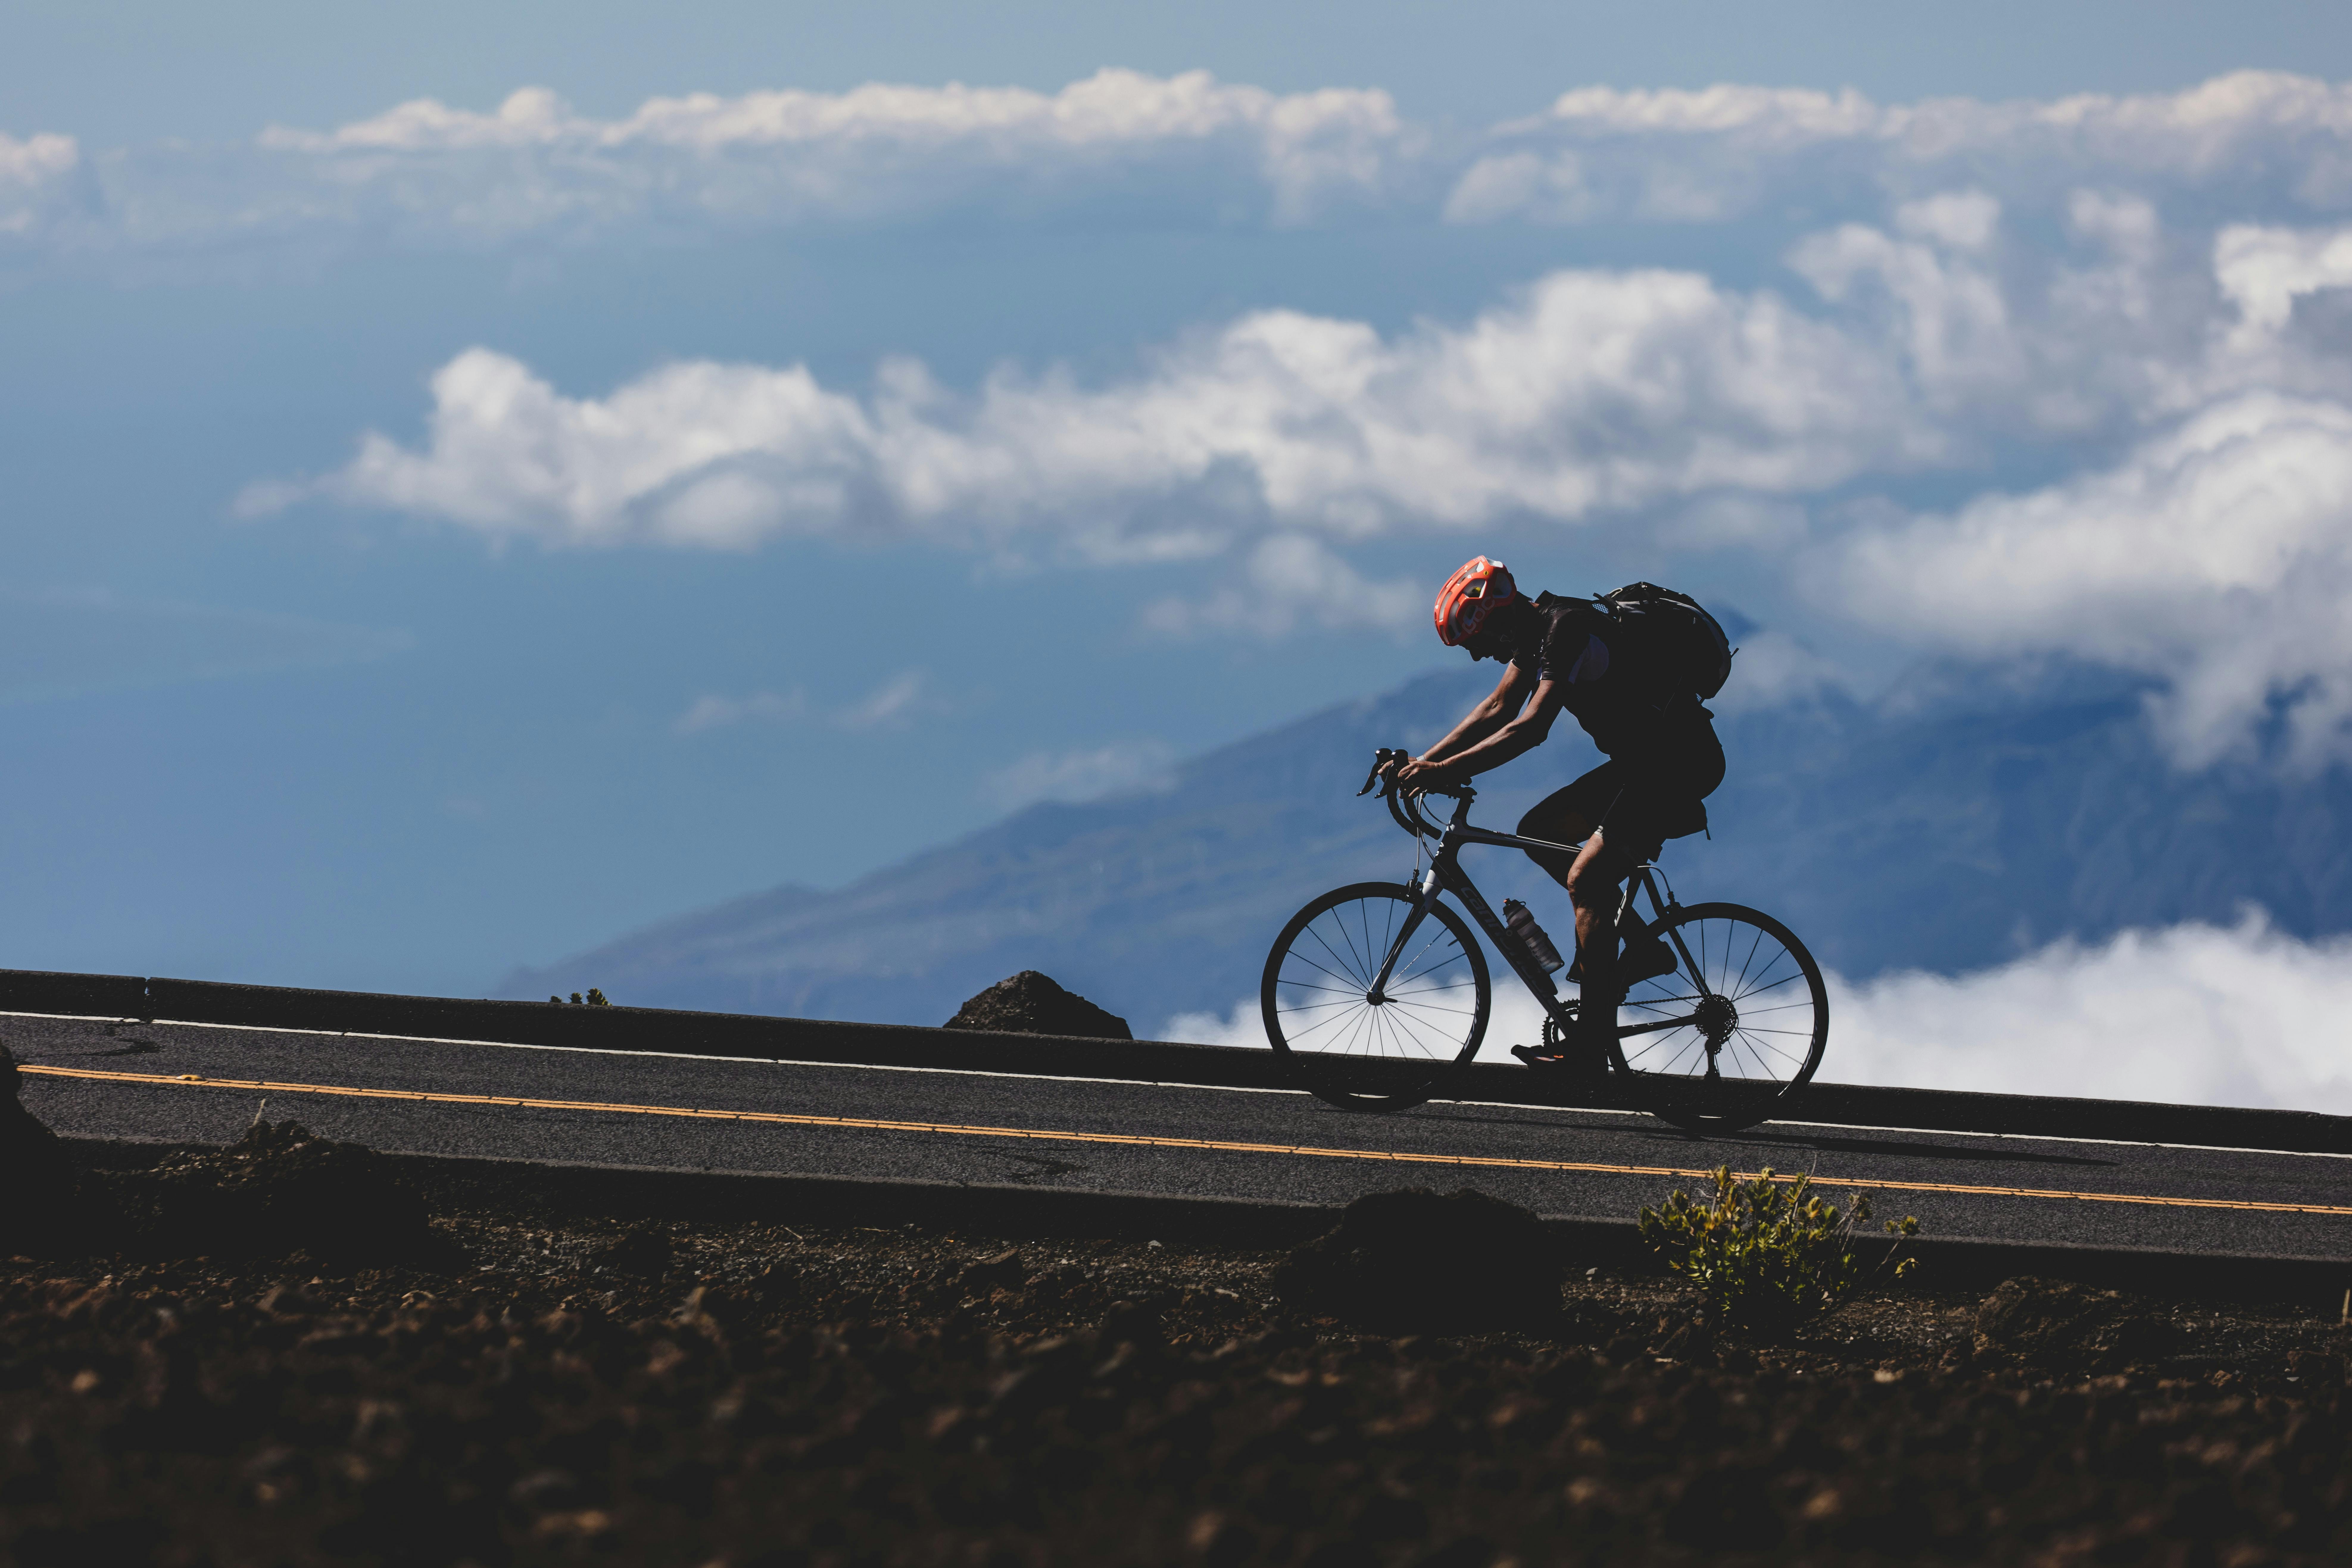 A biker riding uphill on the road at high elevation